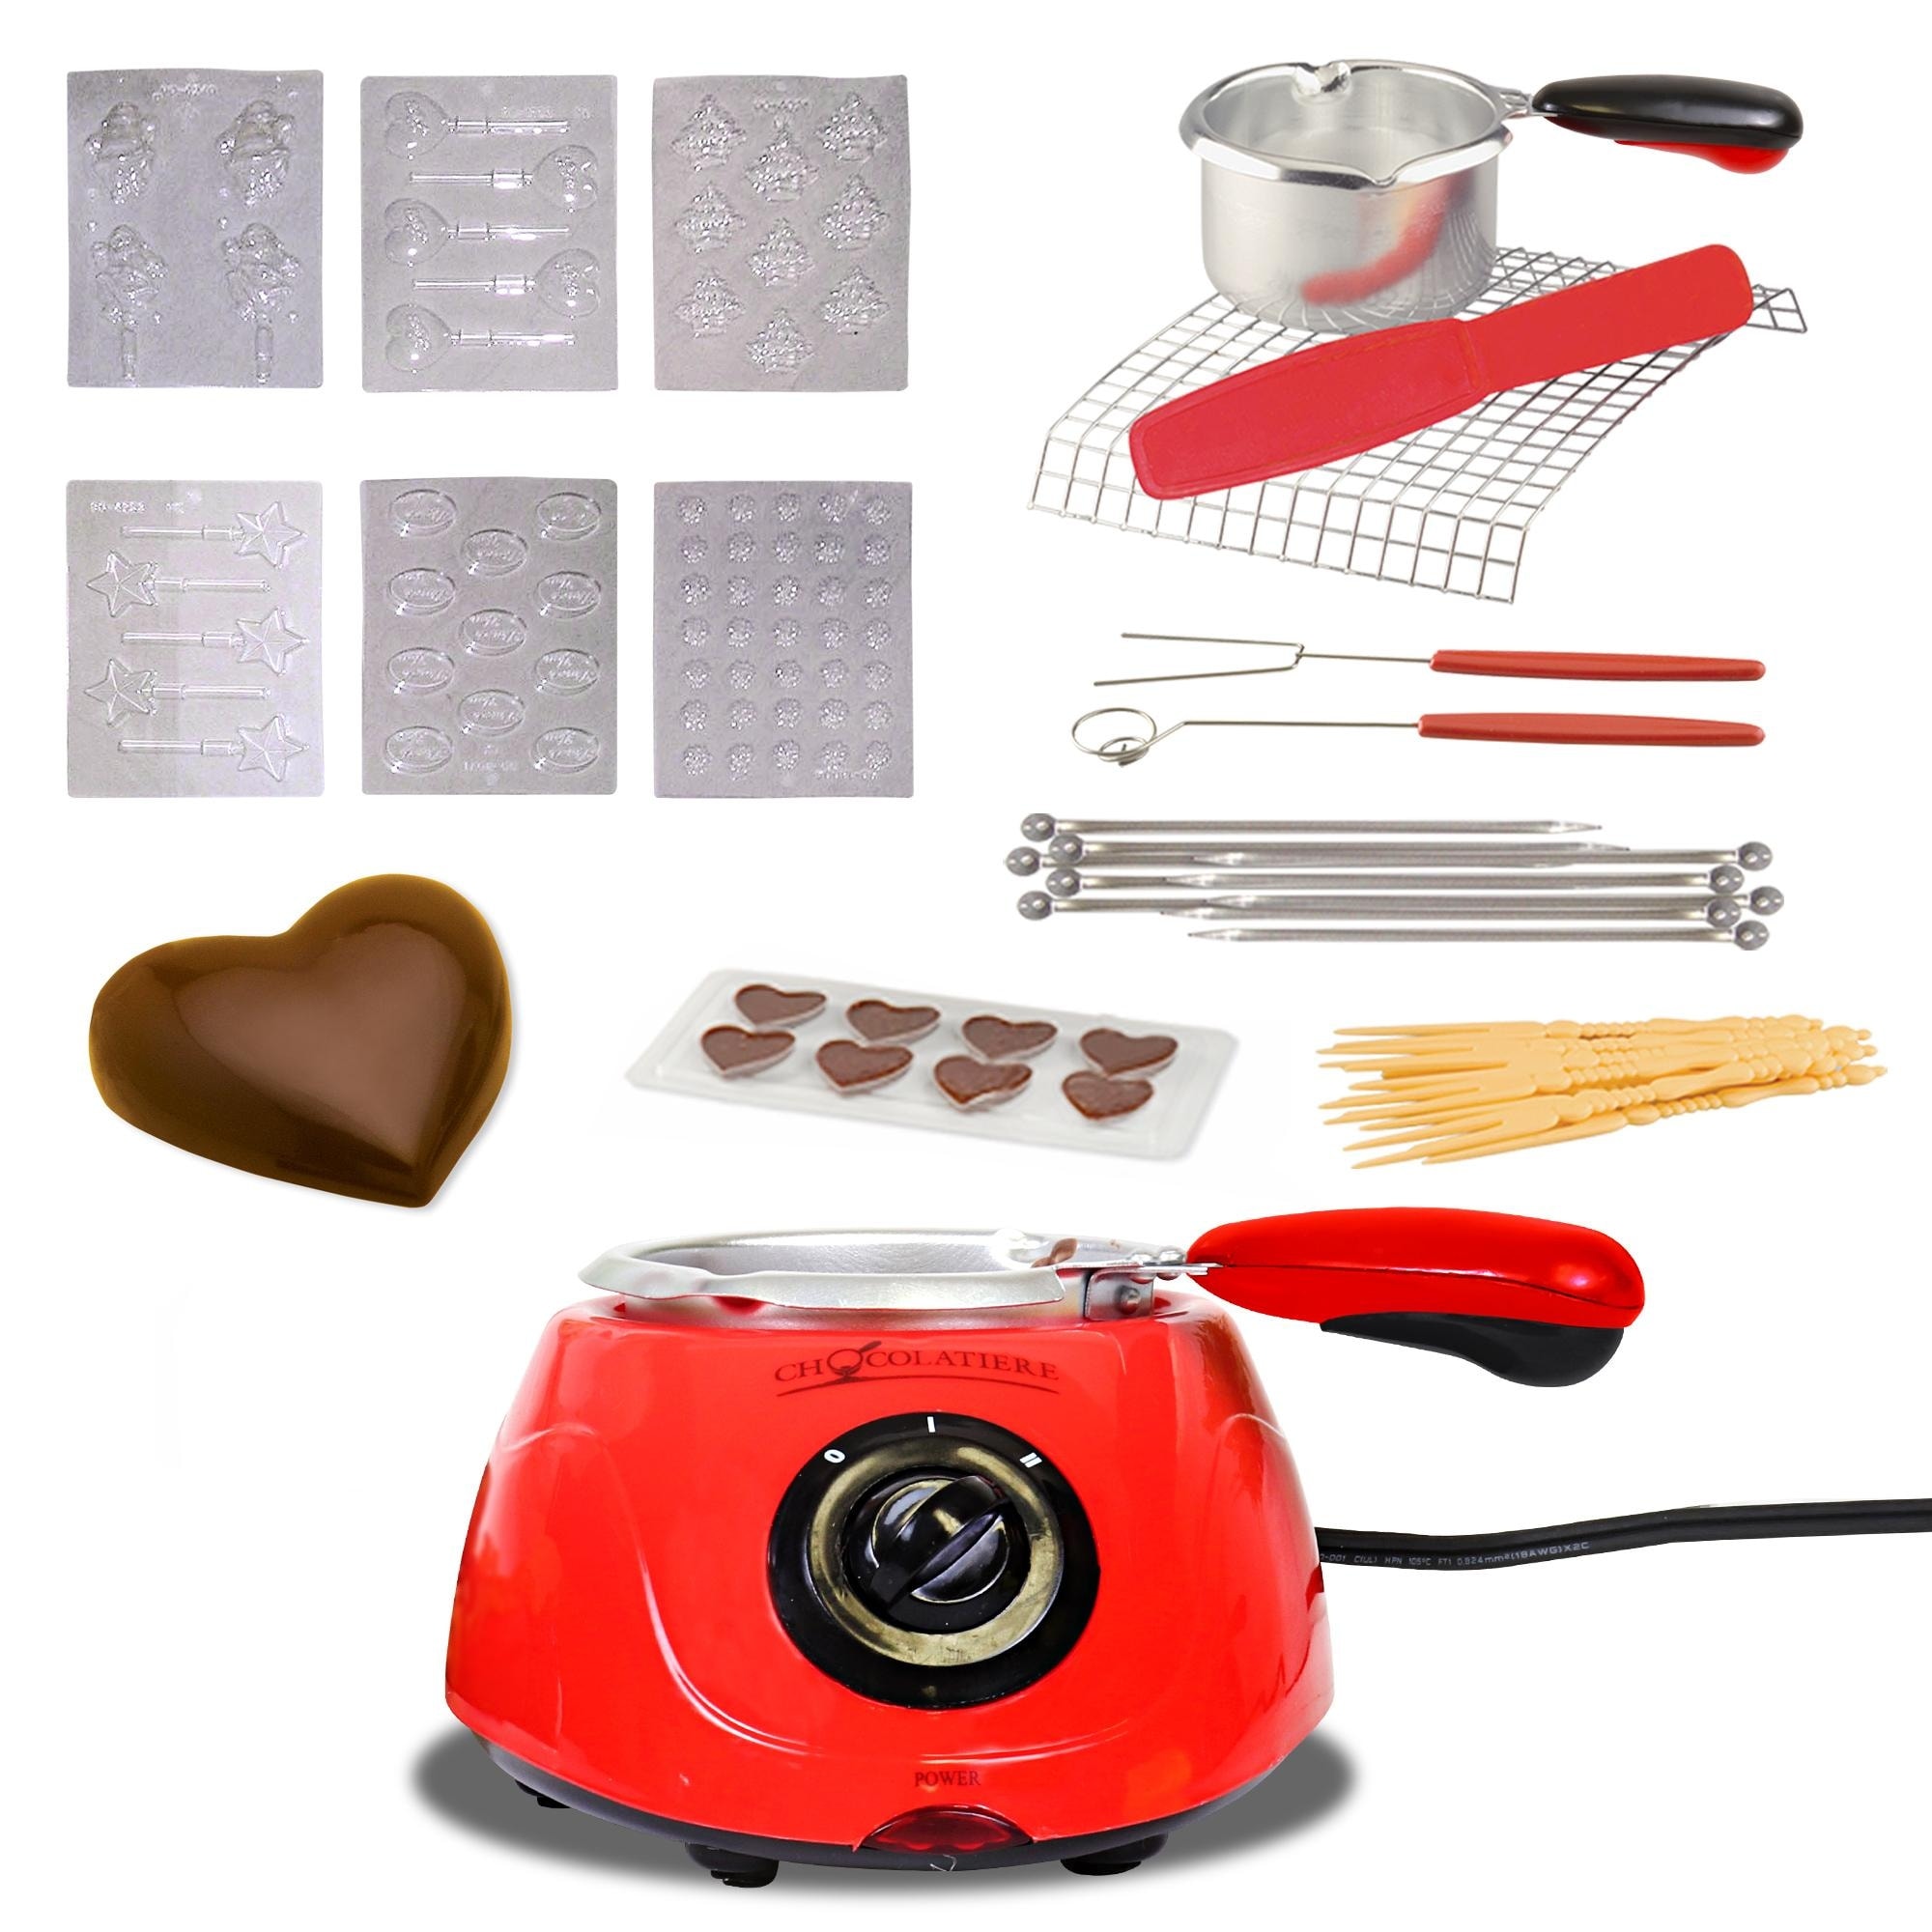 https://ak1.ostkcdn.com/images/products/is/images/direct/e4f668a9794a61c615e51b3c5a33fa2d4268411f/Total-Chef-Chocolatiere-Electric-Melter-and-Fondue-Pot-for-Chocolate-and-Candy-Melts%2C-8.8-oz-%28250-g%29.jpg